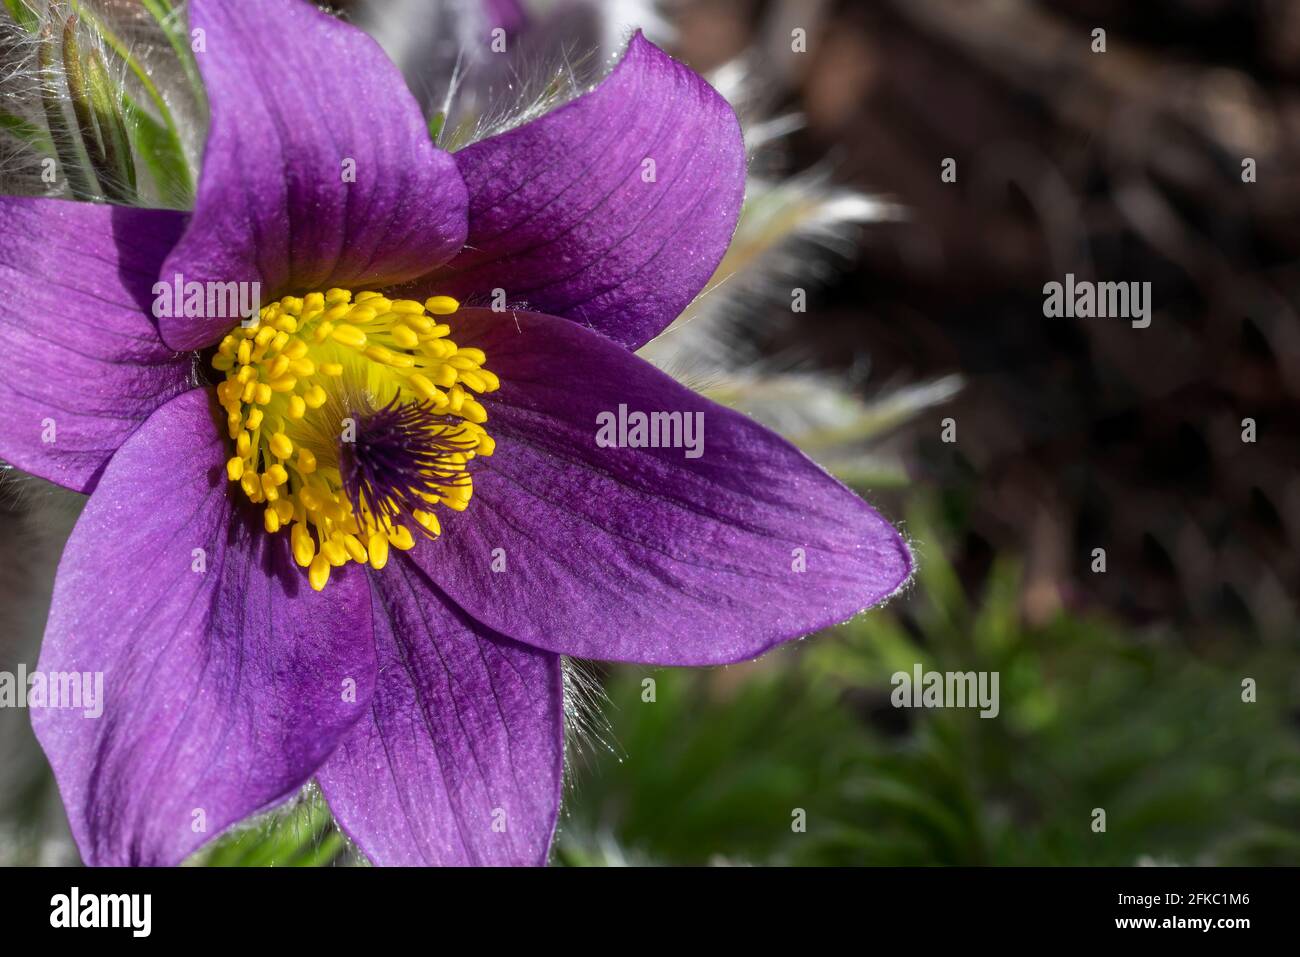 Pulsatilla vulgaris a purple spring flowering plant commonly known as pasqueflower or meadow anemone which is in flower during March and April, stock Stock Photo